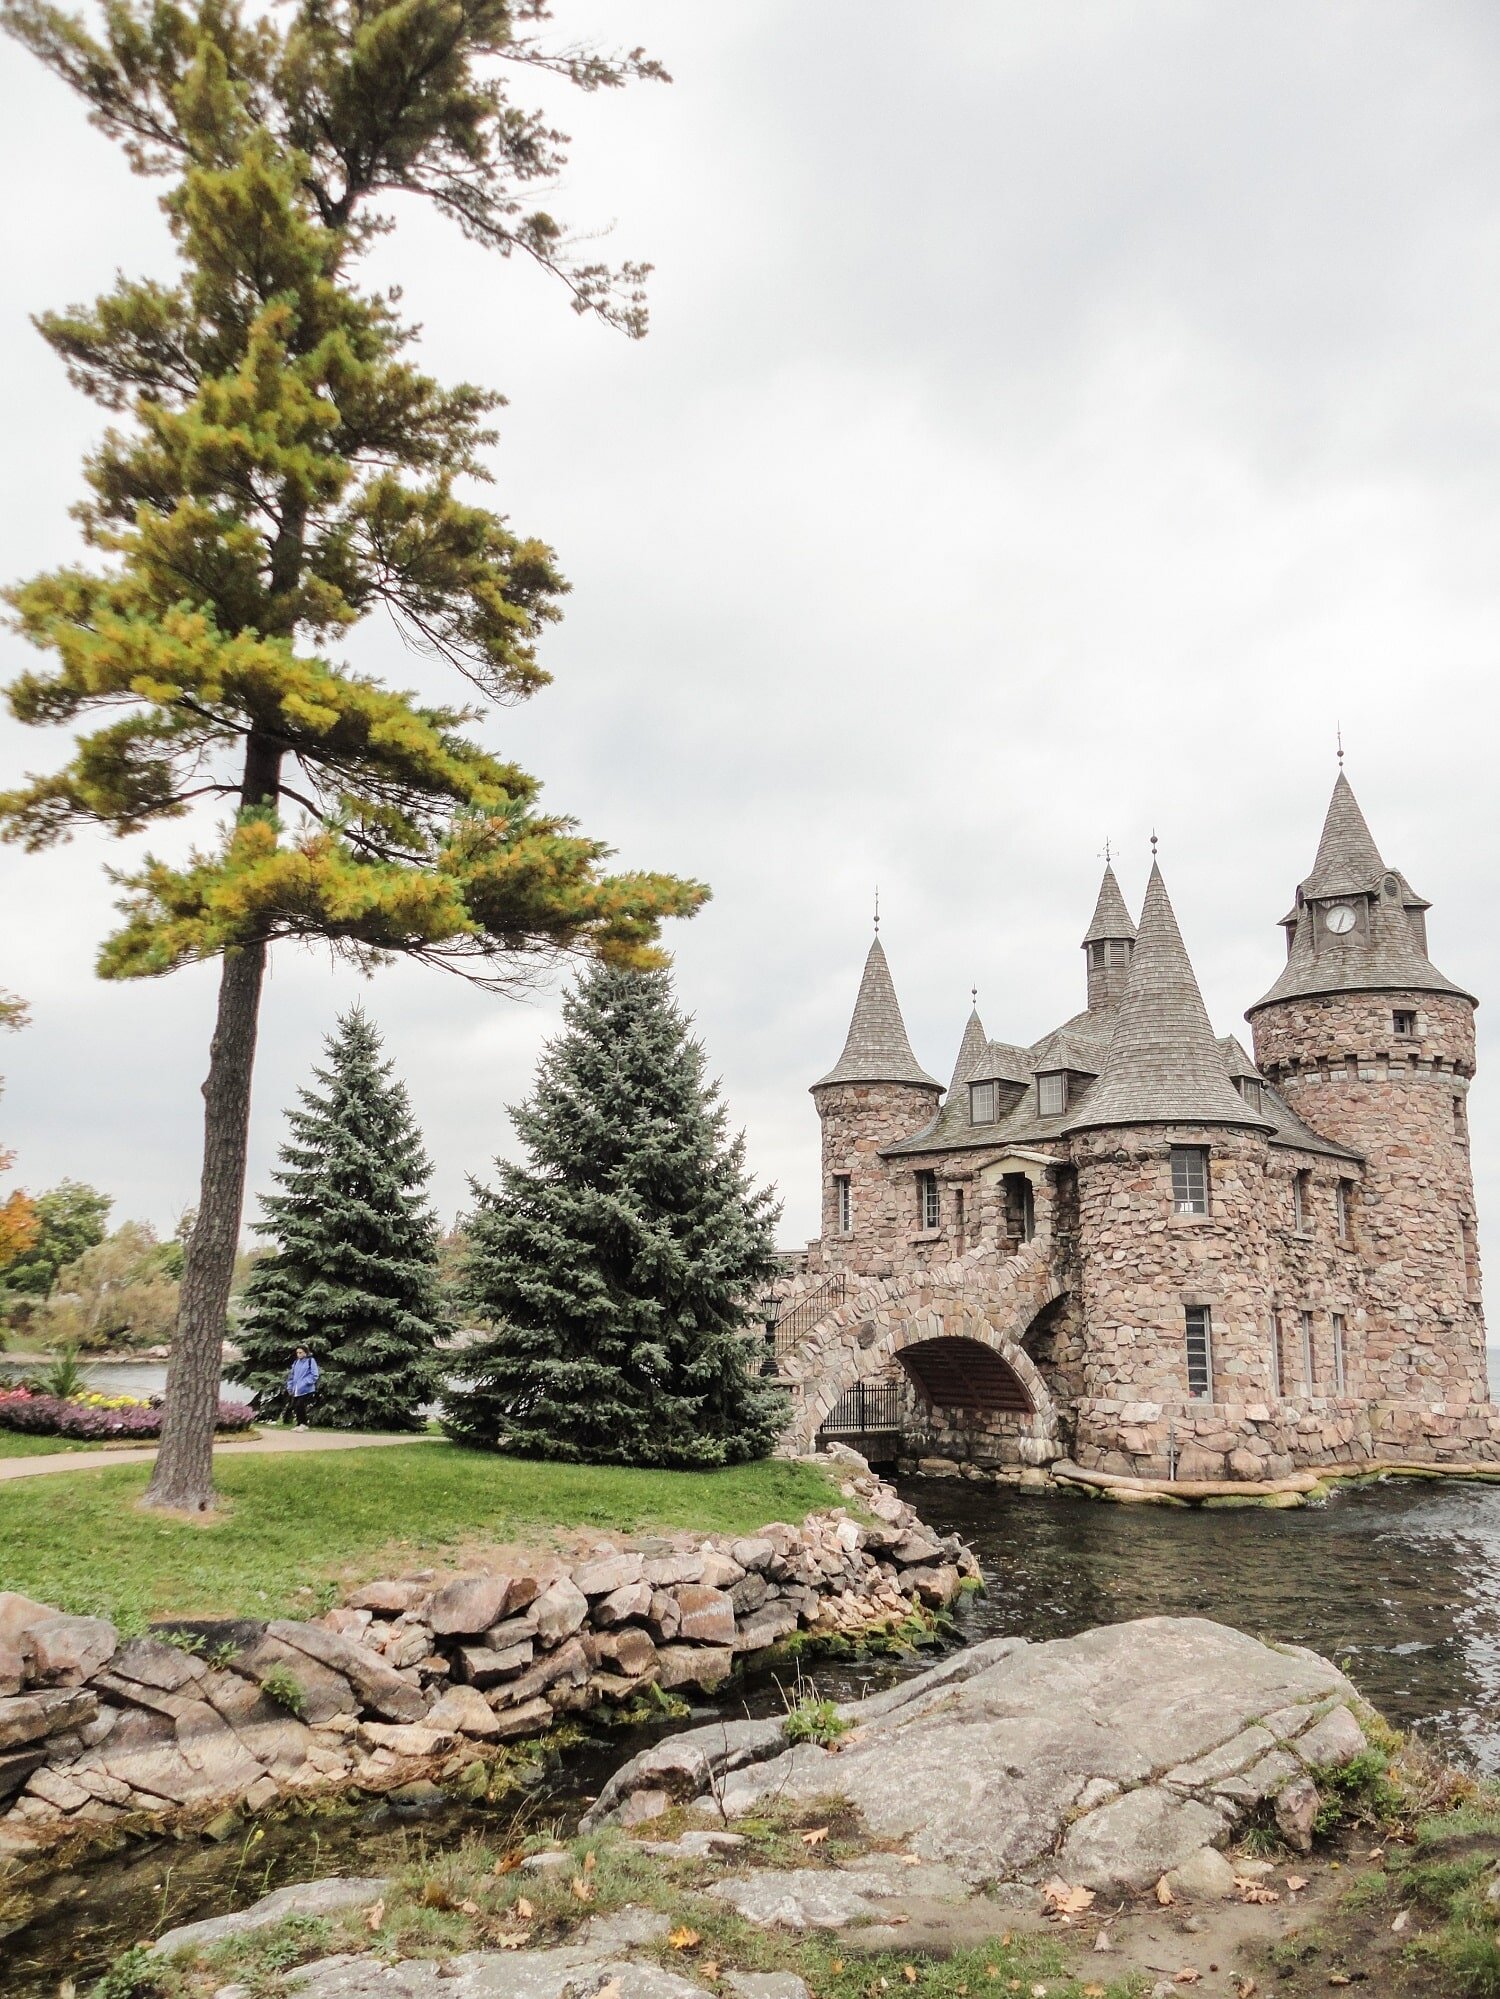  Boldt Castle, Upstate New York fall travel ideas | Blooming Magnolias Blog | Travel, A Thousand Islands, NY 